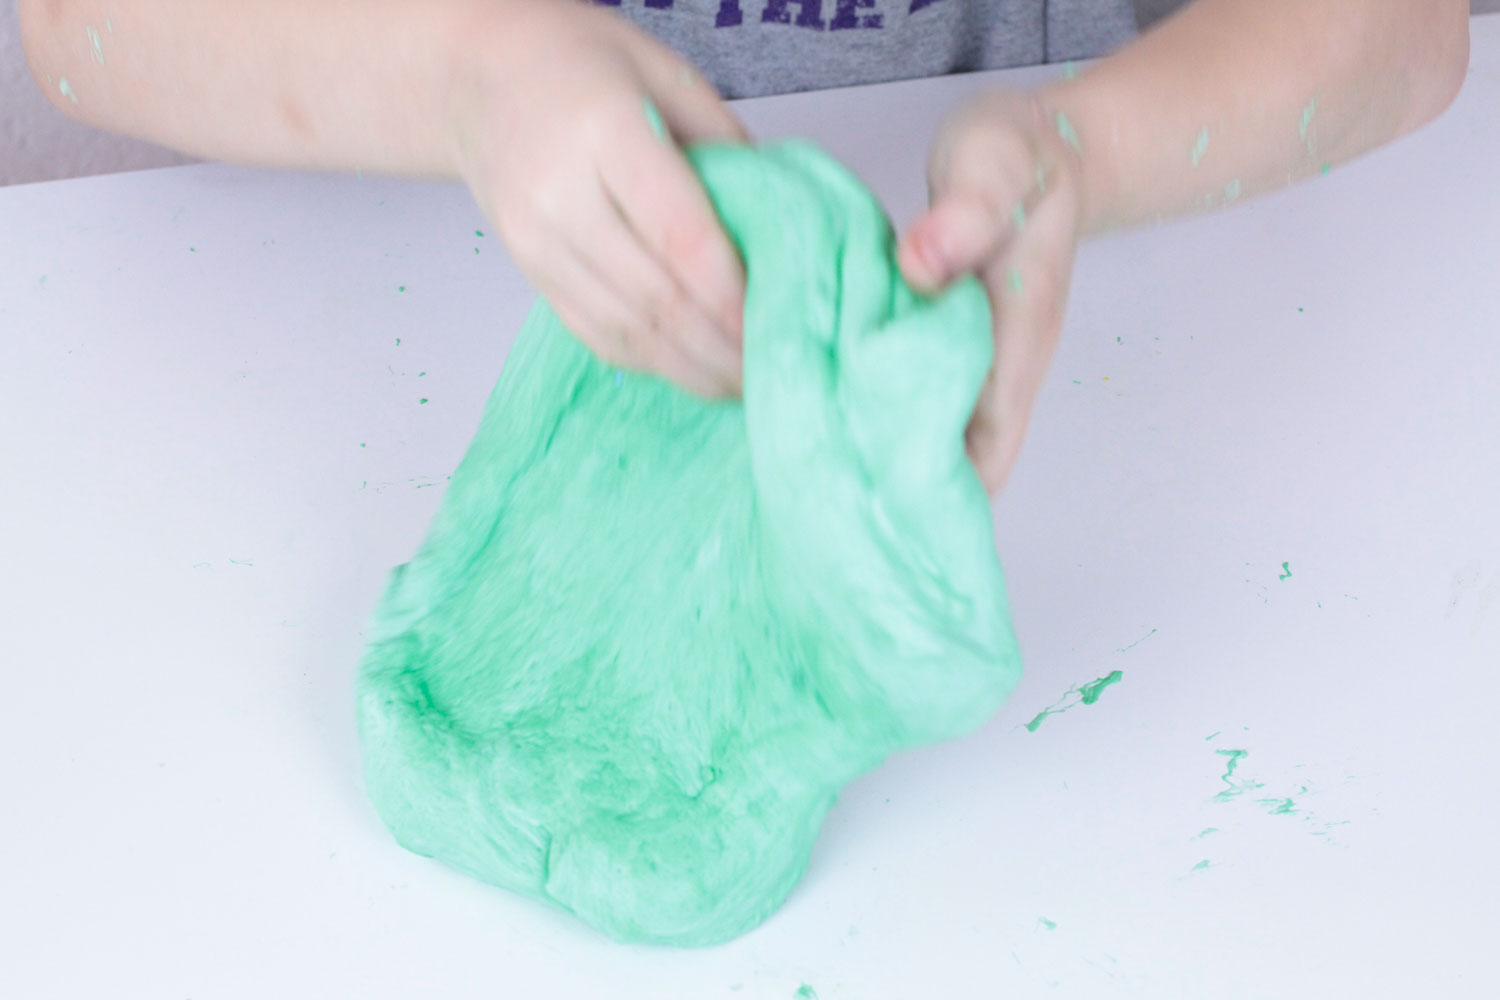 Learn about chemical reactions and polymer chains in this fun activity making perfect fluffy slime! Kids will love this hands-on science activity. 